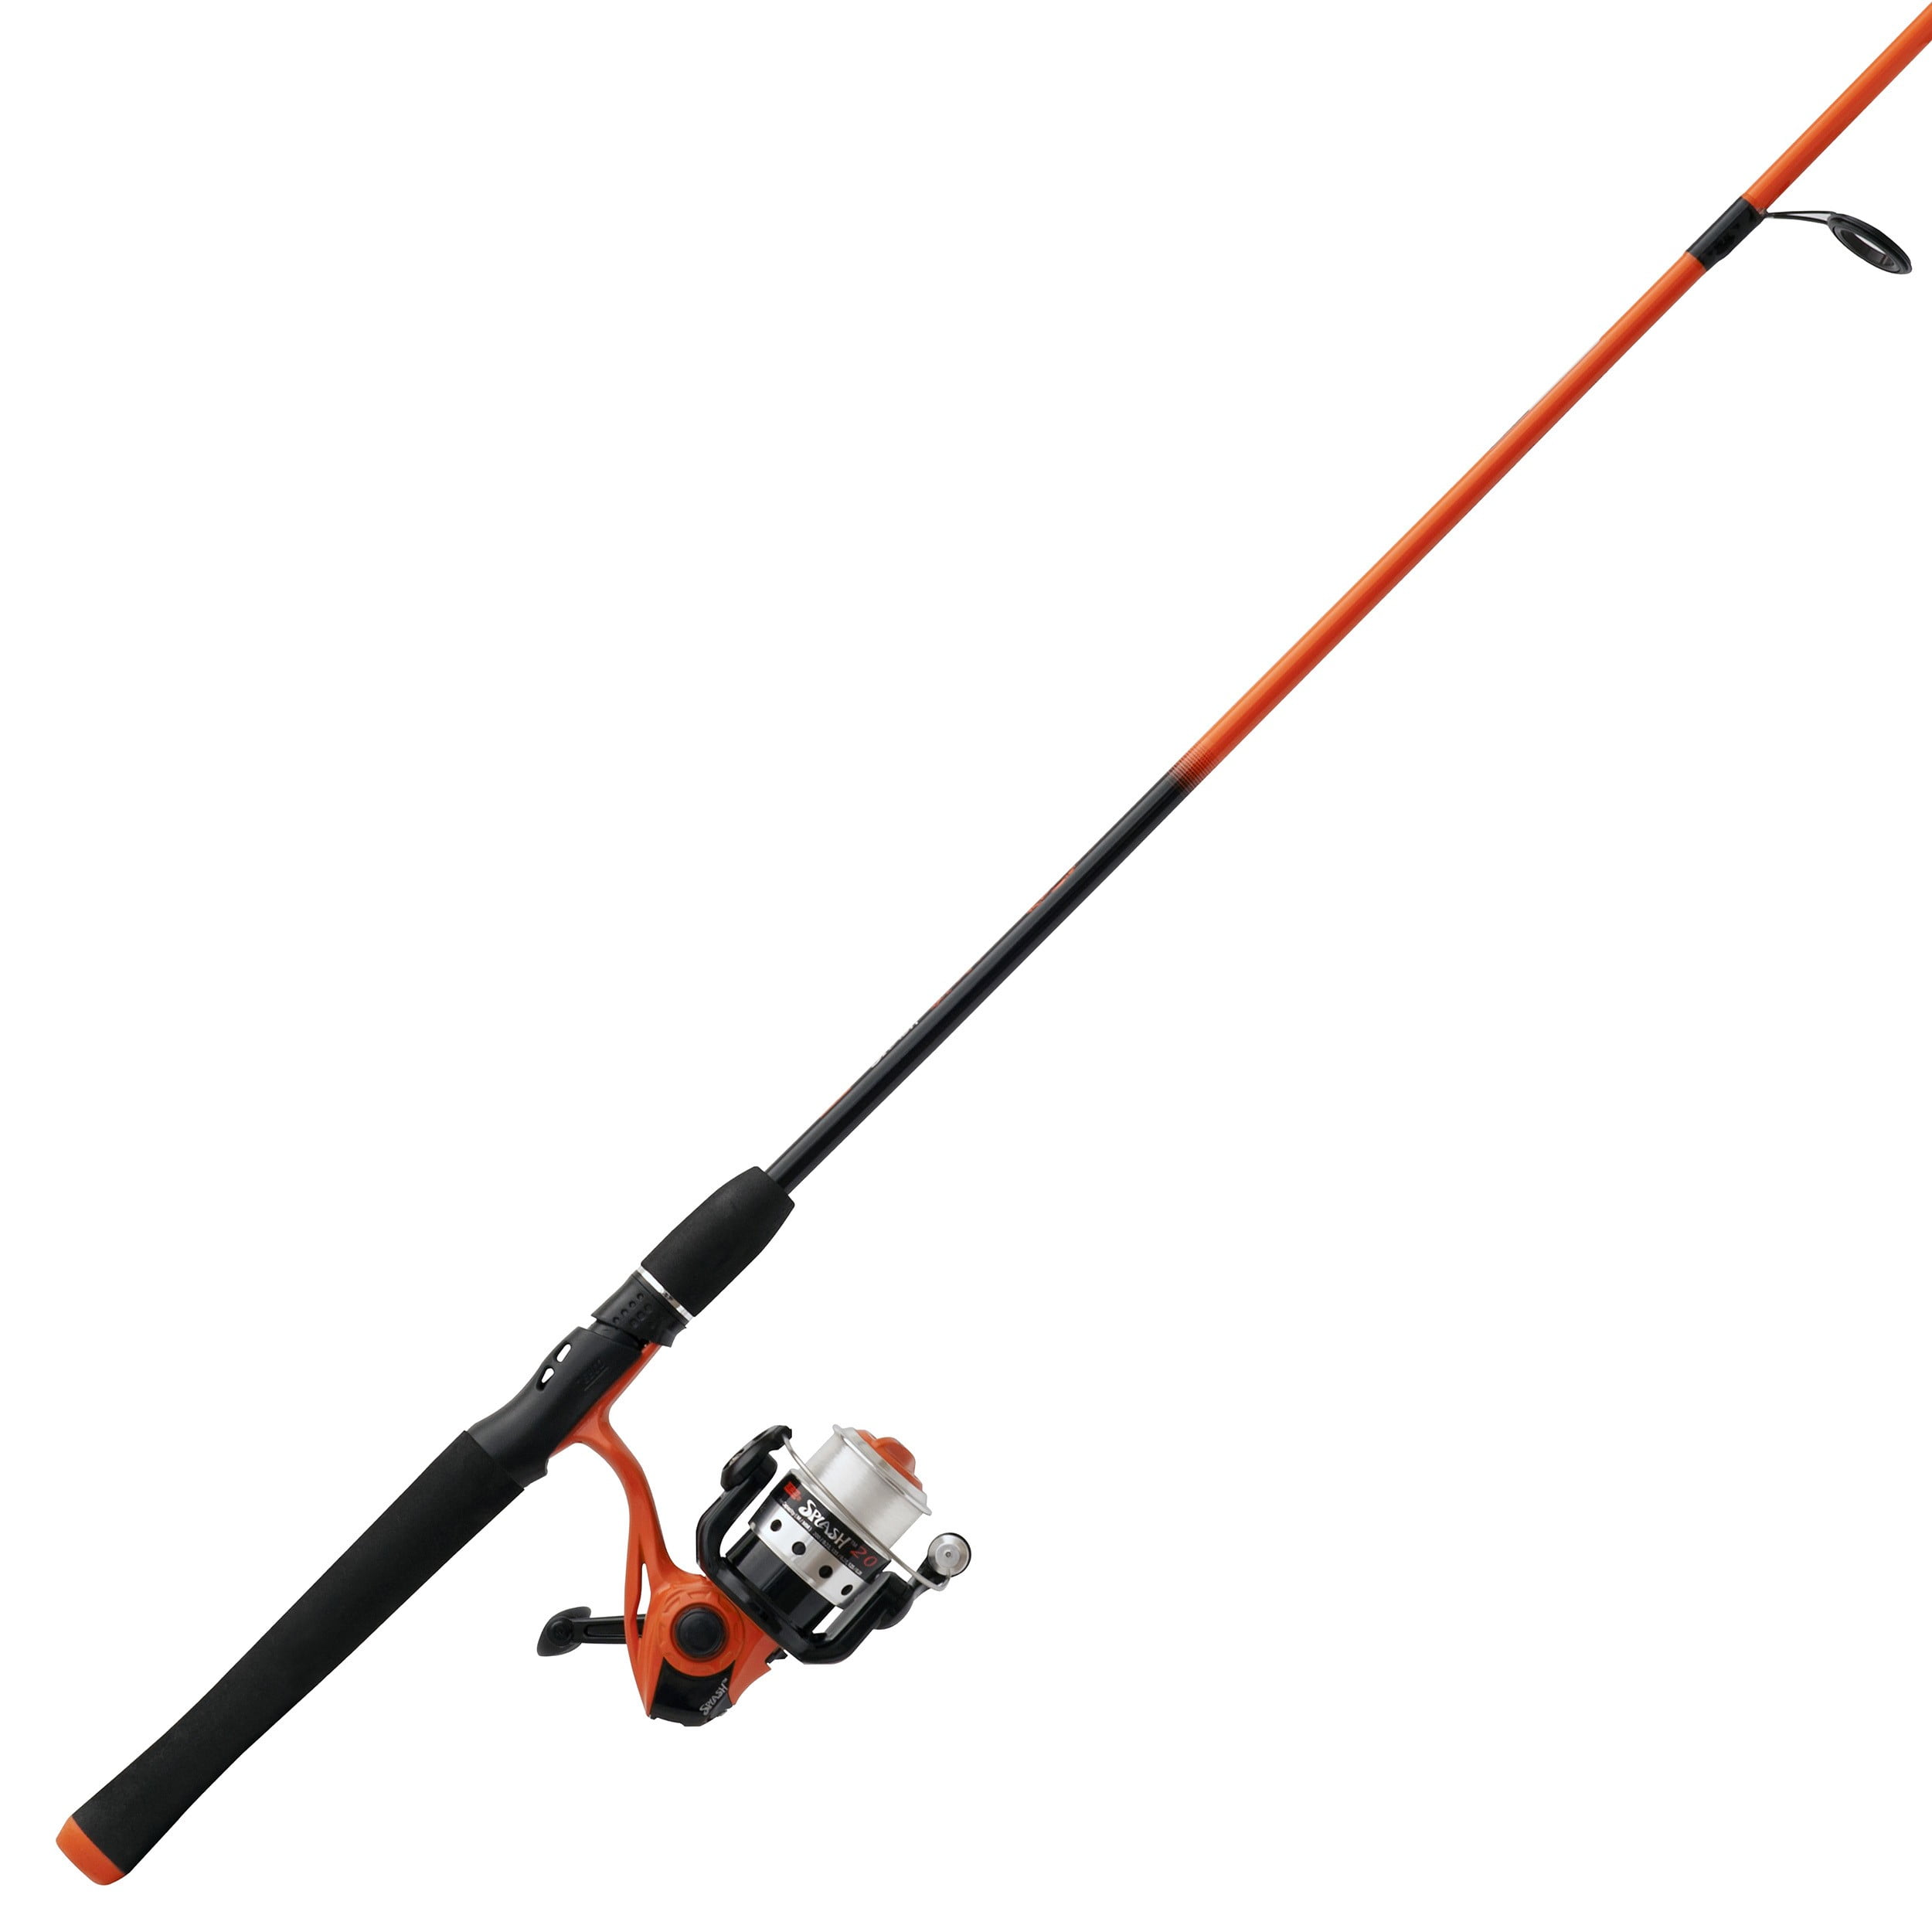  Zebco Kids Splash Floating Spincast Reel and Fishing Rod  Combo, 29-Inch 1-Piece Fishing Pole, Size 20 Reel, Right-Hand Retrieve,  Pre-Spooled with 6-Pound Cajun Line, Blue : Sports & Outdoors